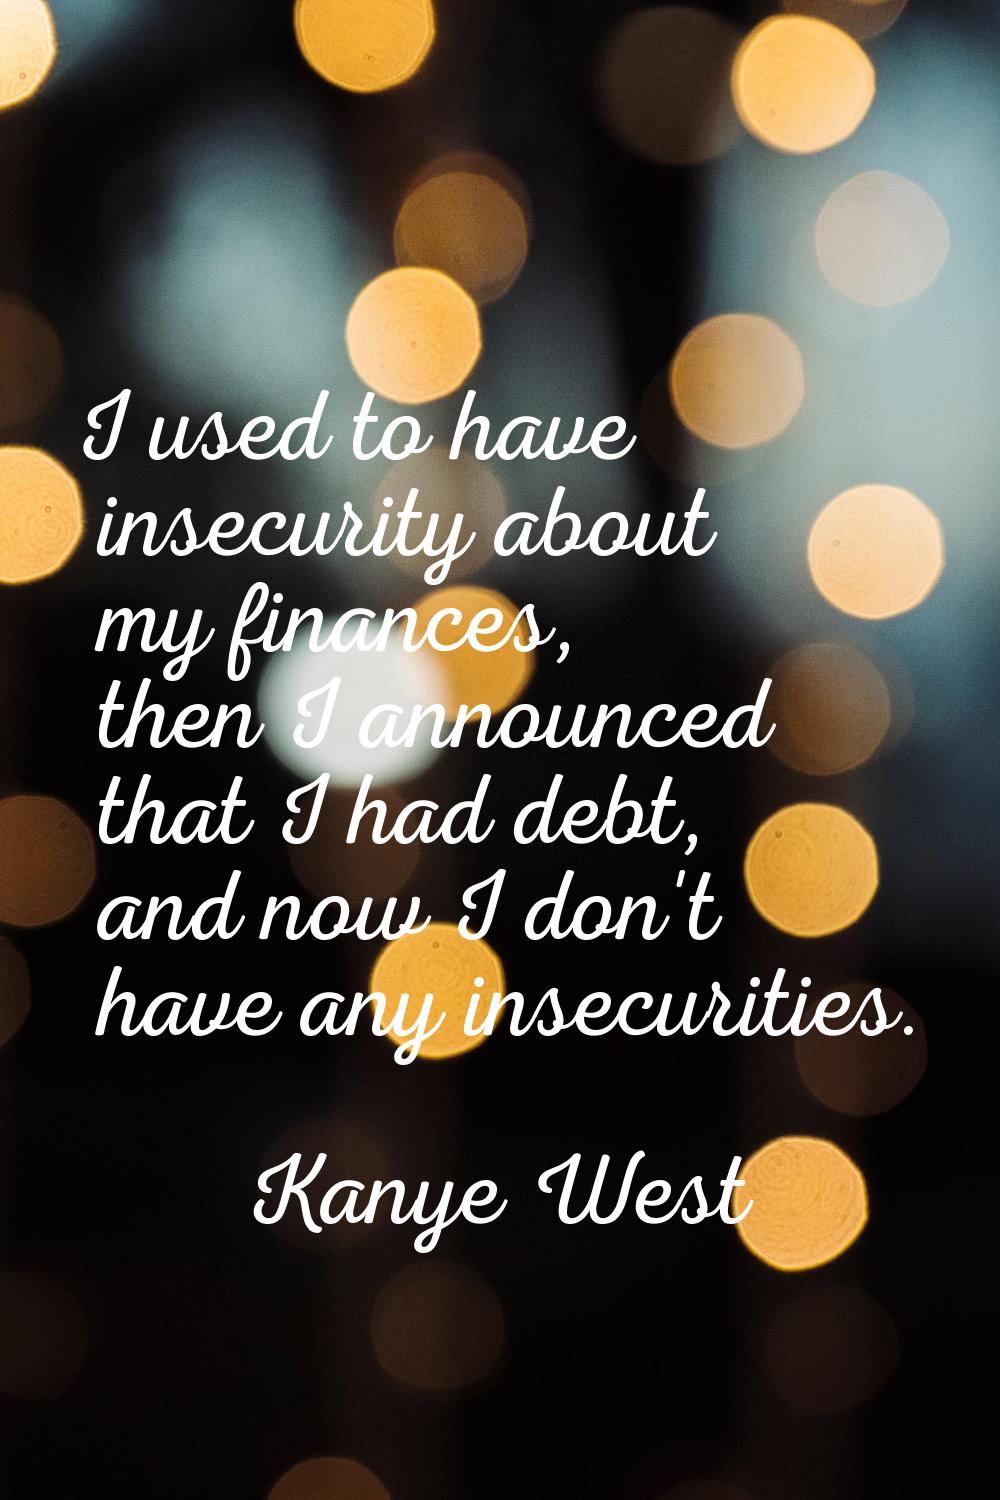 I used to have insecurity about my finances, then I announced that I had debt, and now I don't have